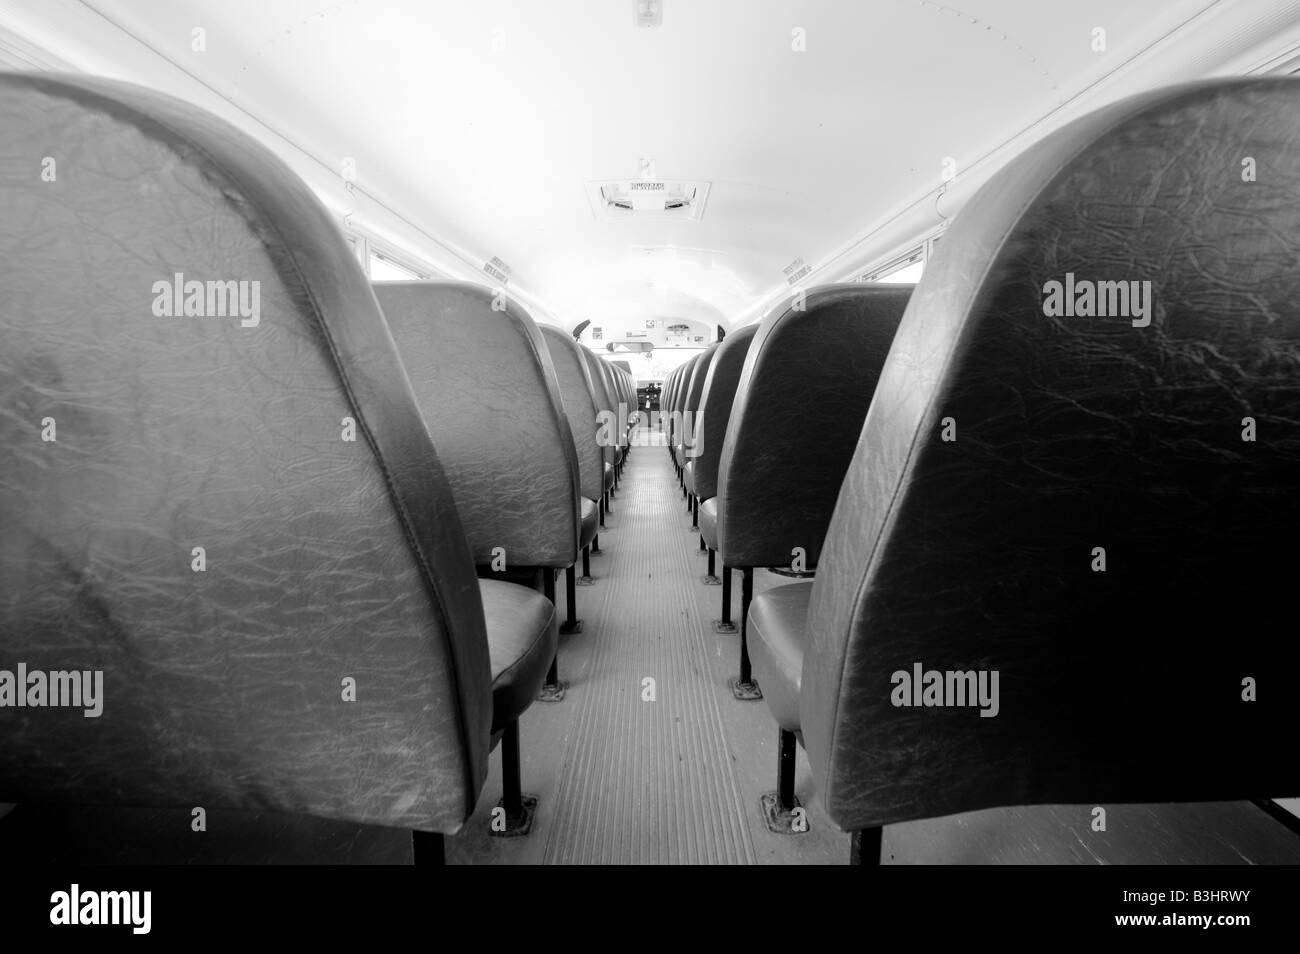 Rows of school bus seats waiting for occupants. Stock Photo